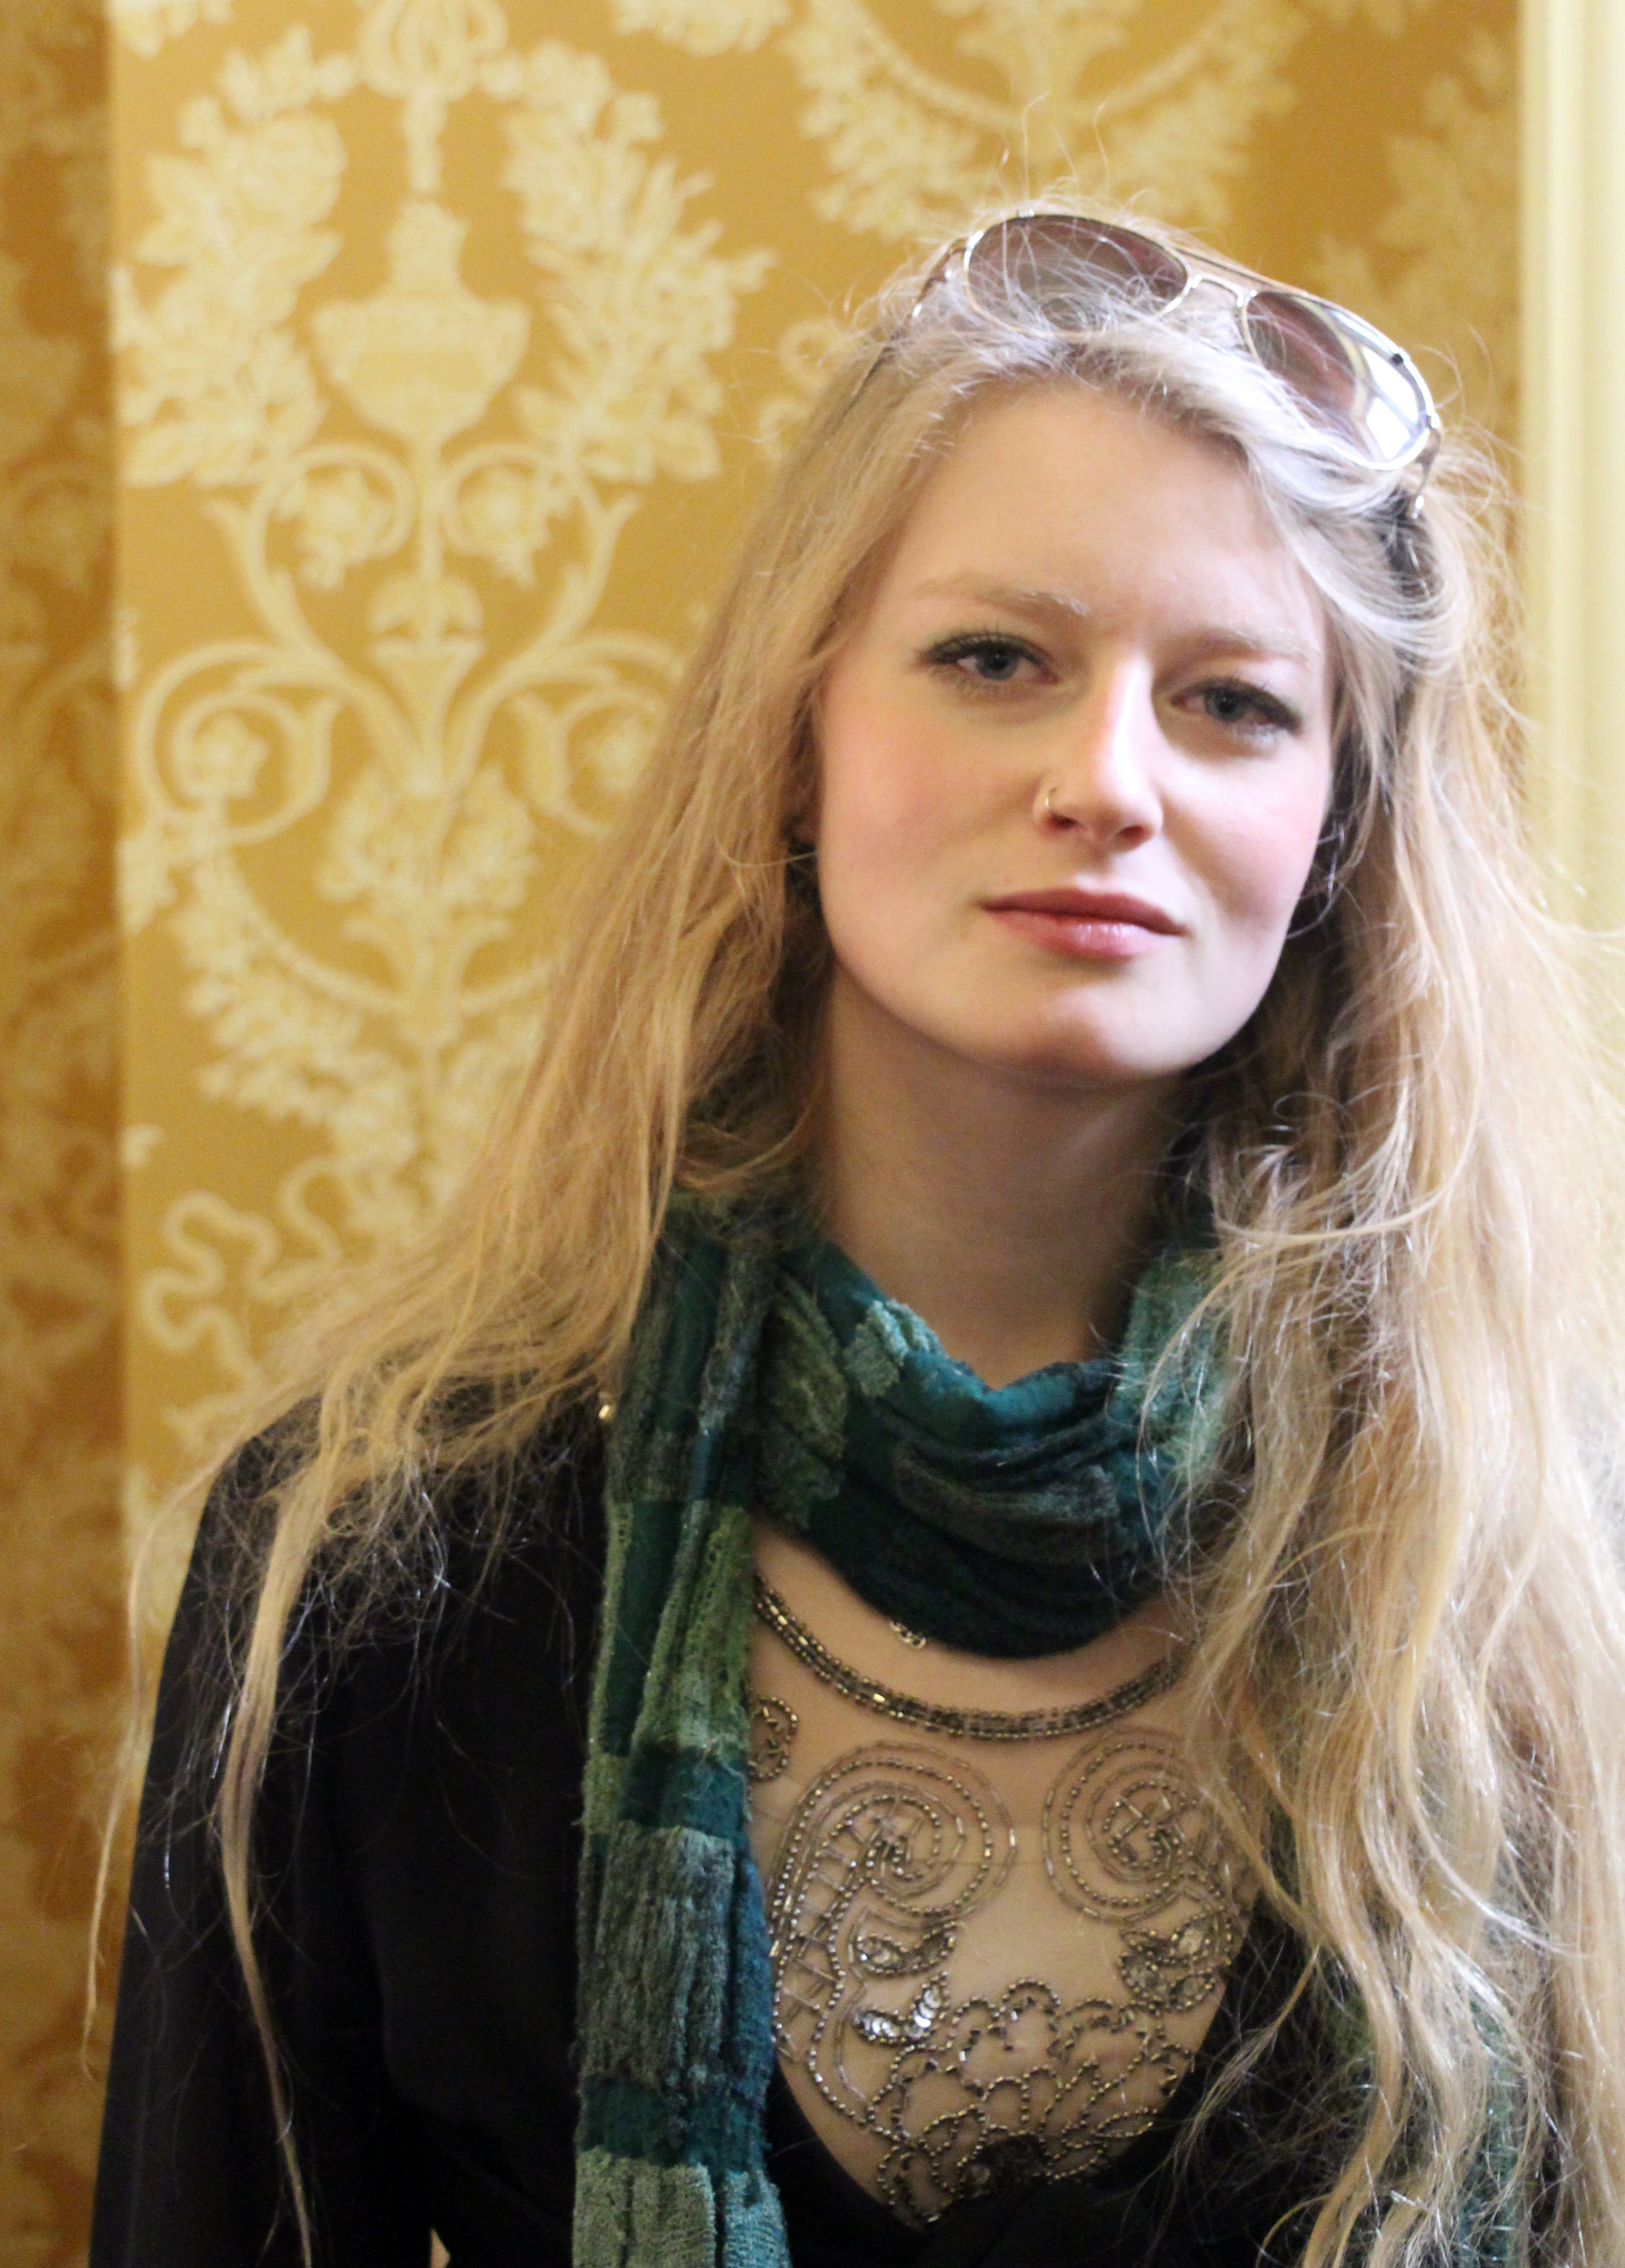 The documentary will explore the tragic circumstances surrounding the death of 19-year-old Gaia Pope-Sutherland (photo credit: BBC/Summer Films/Pope-Sutherland family)